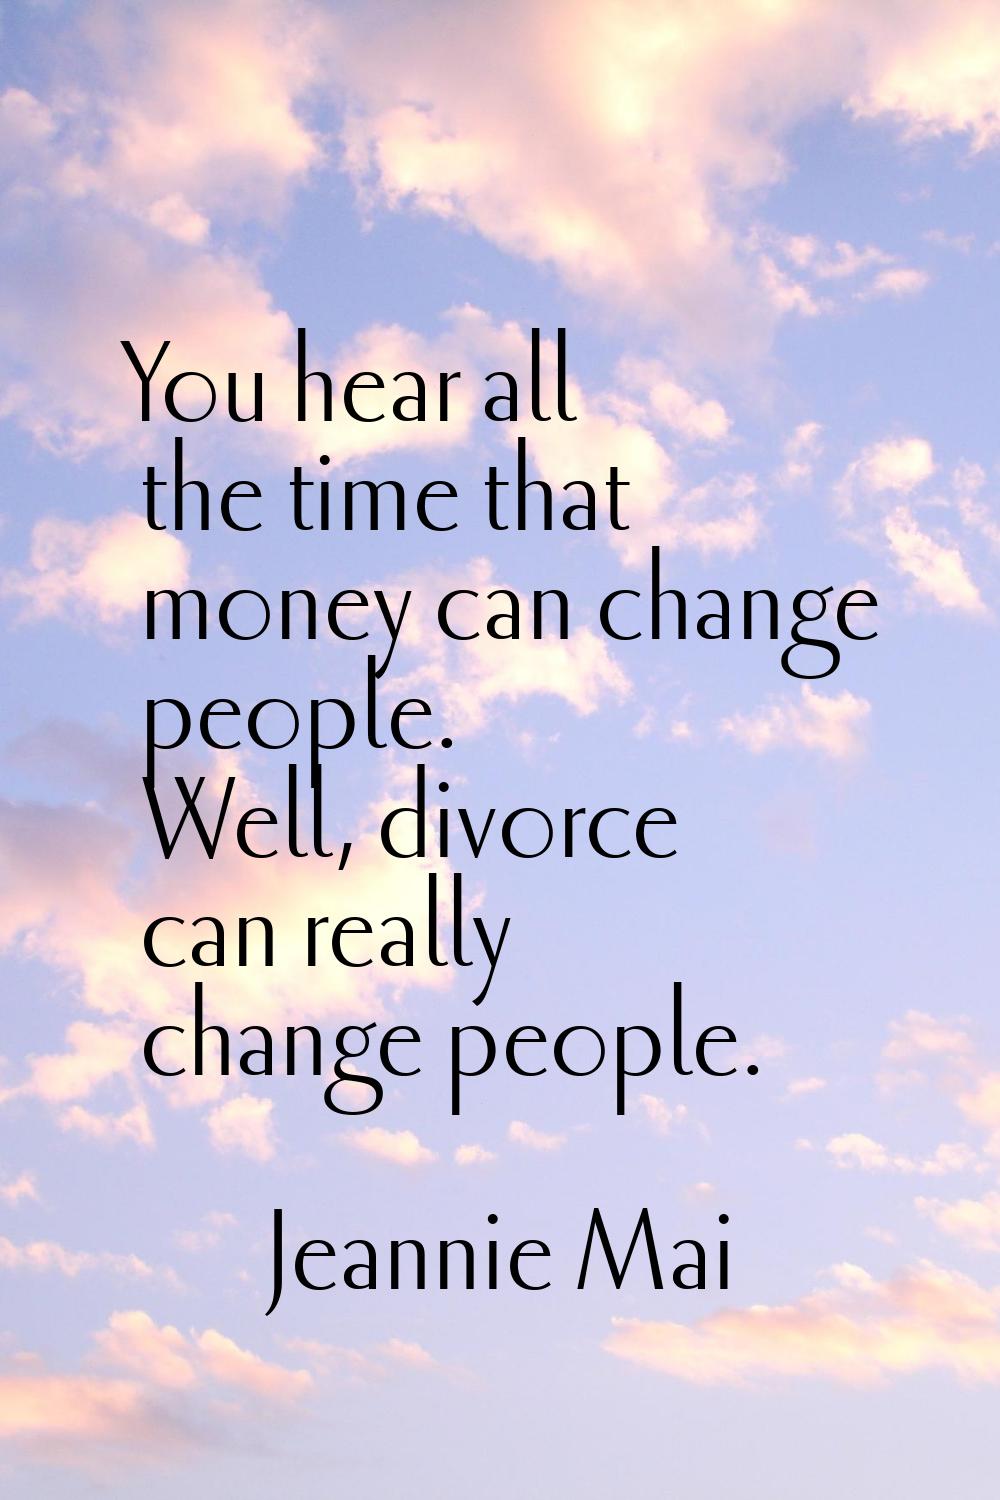 You hear all the time that money can change people. Well, divorce can really change people.